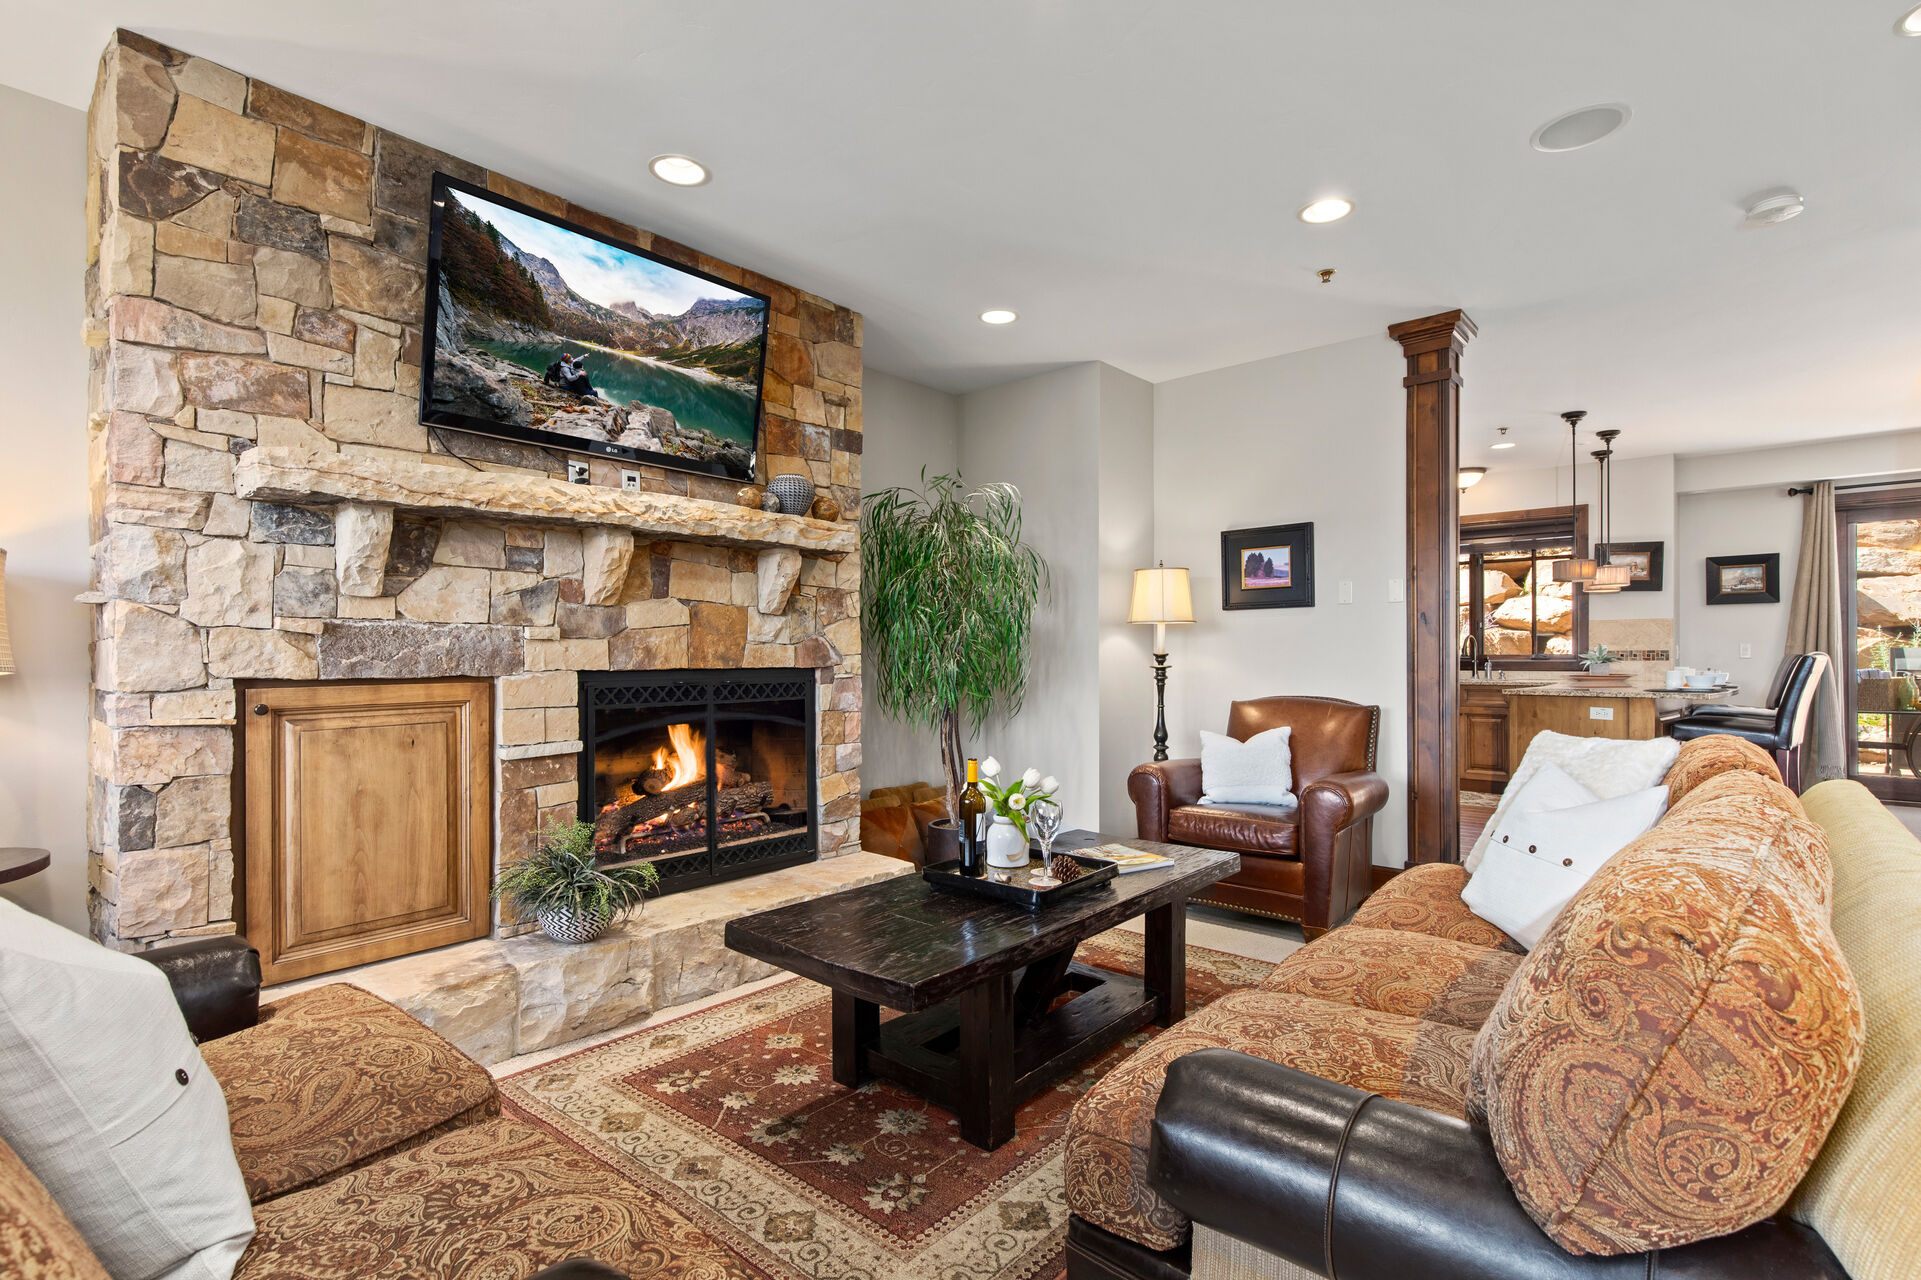 Living Room with gas fireplace, smart TV, plush furnishings including sofa sleeper, and private deck access